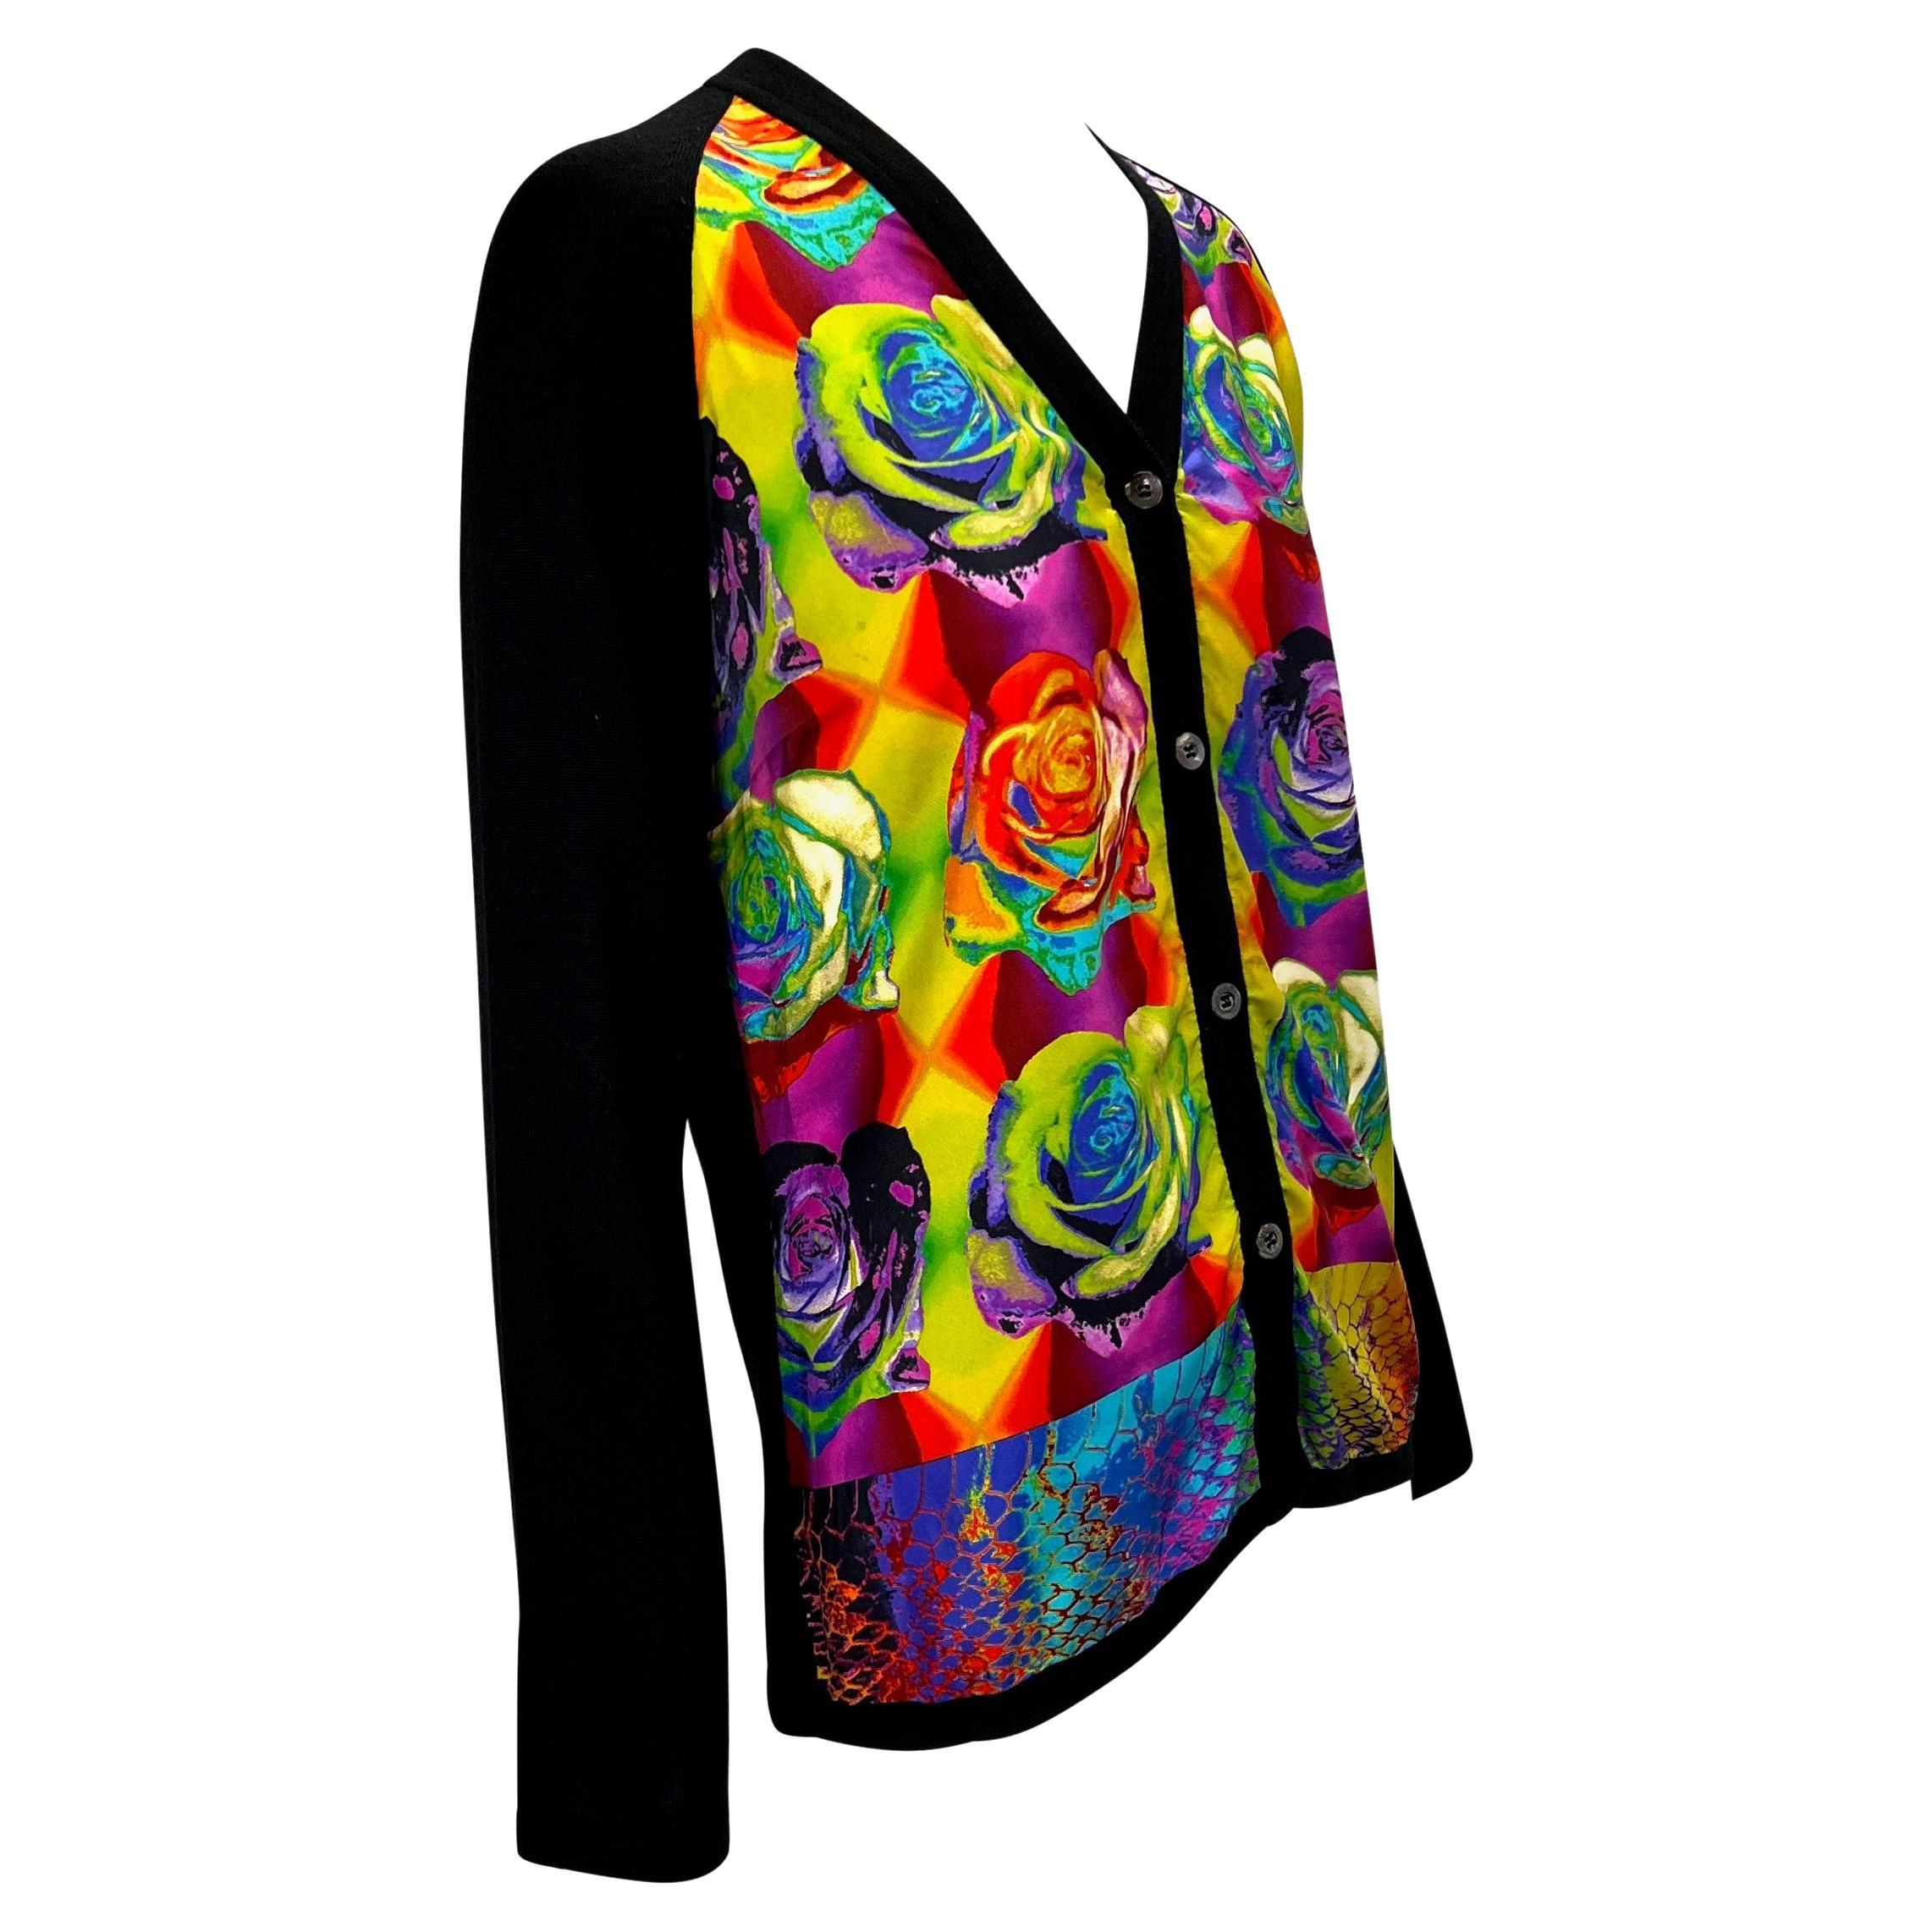 1996 Gucci by Tom Ford Psychedelic Seide Druck Wolle Panel Strickjacke Pullover im Angebot 1